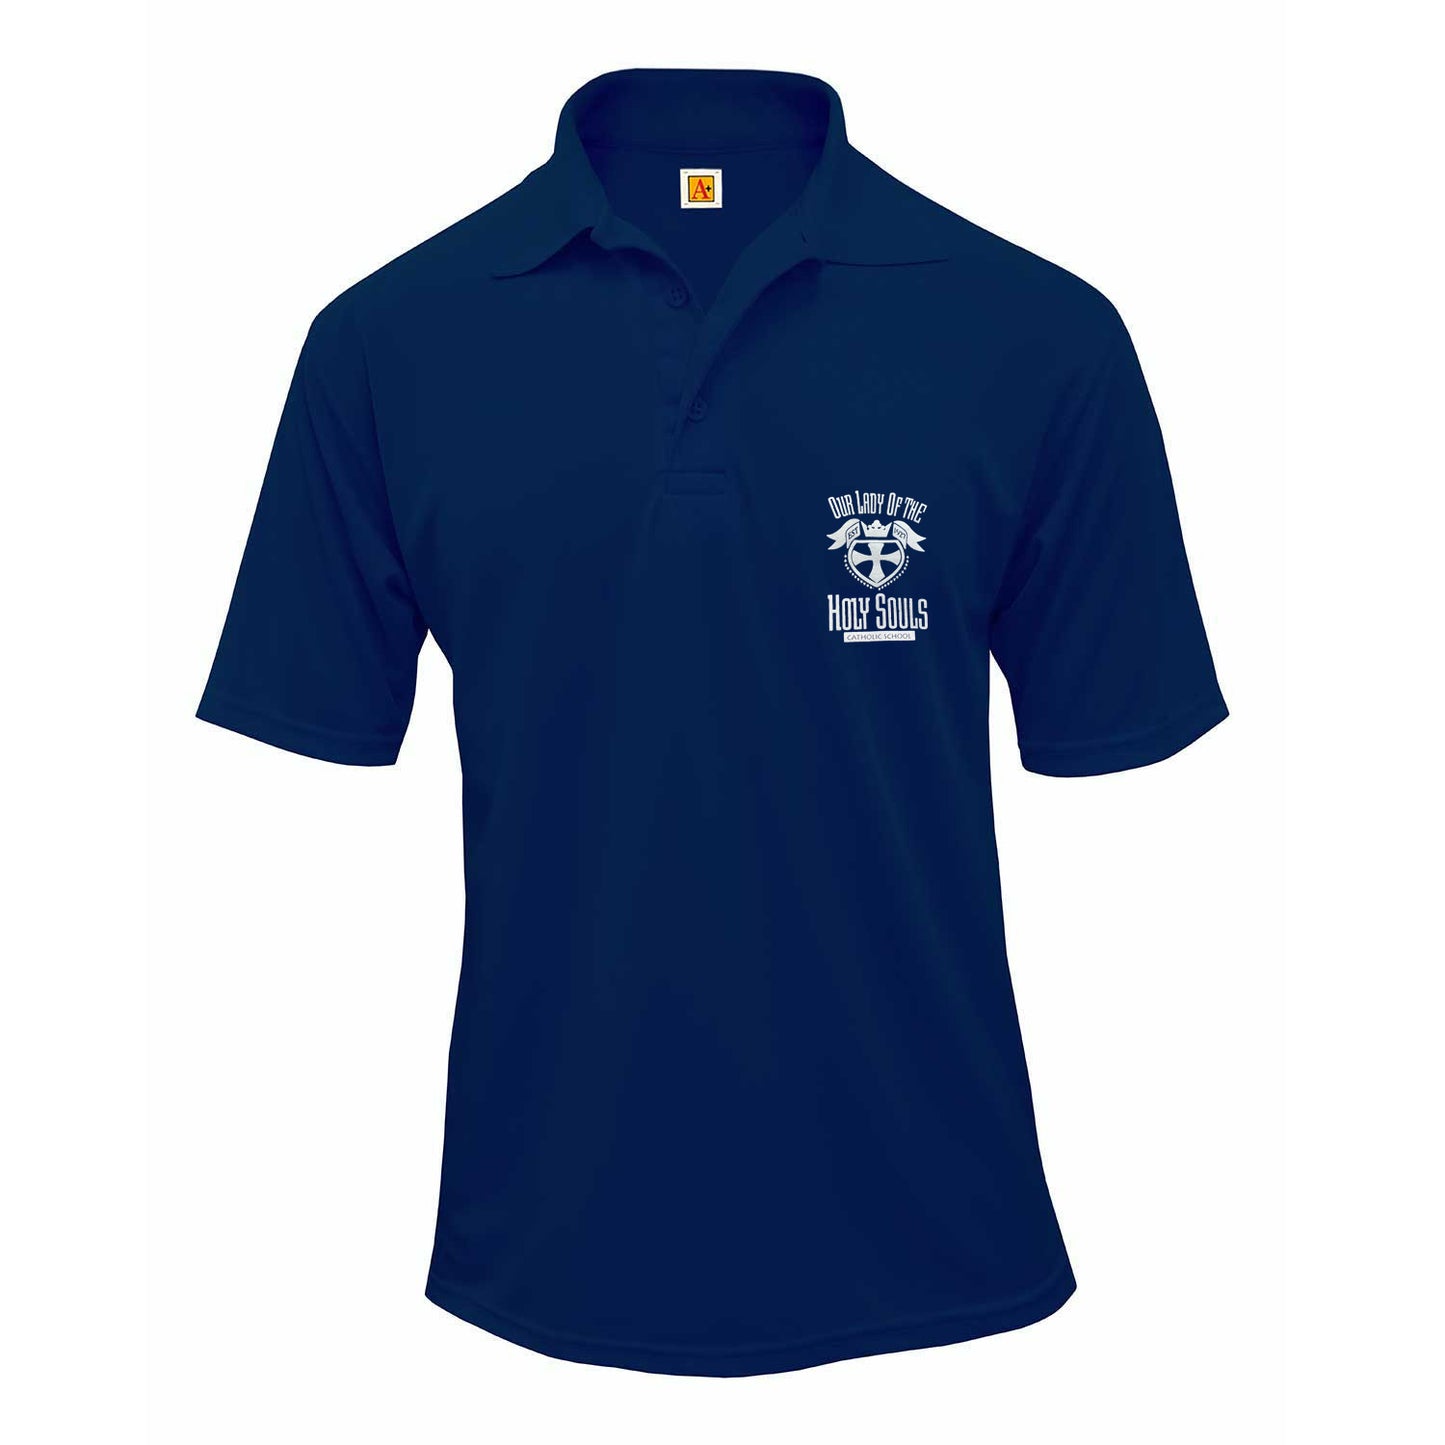 Adult Performance Polo With Holy Souls Logo